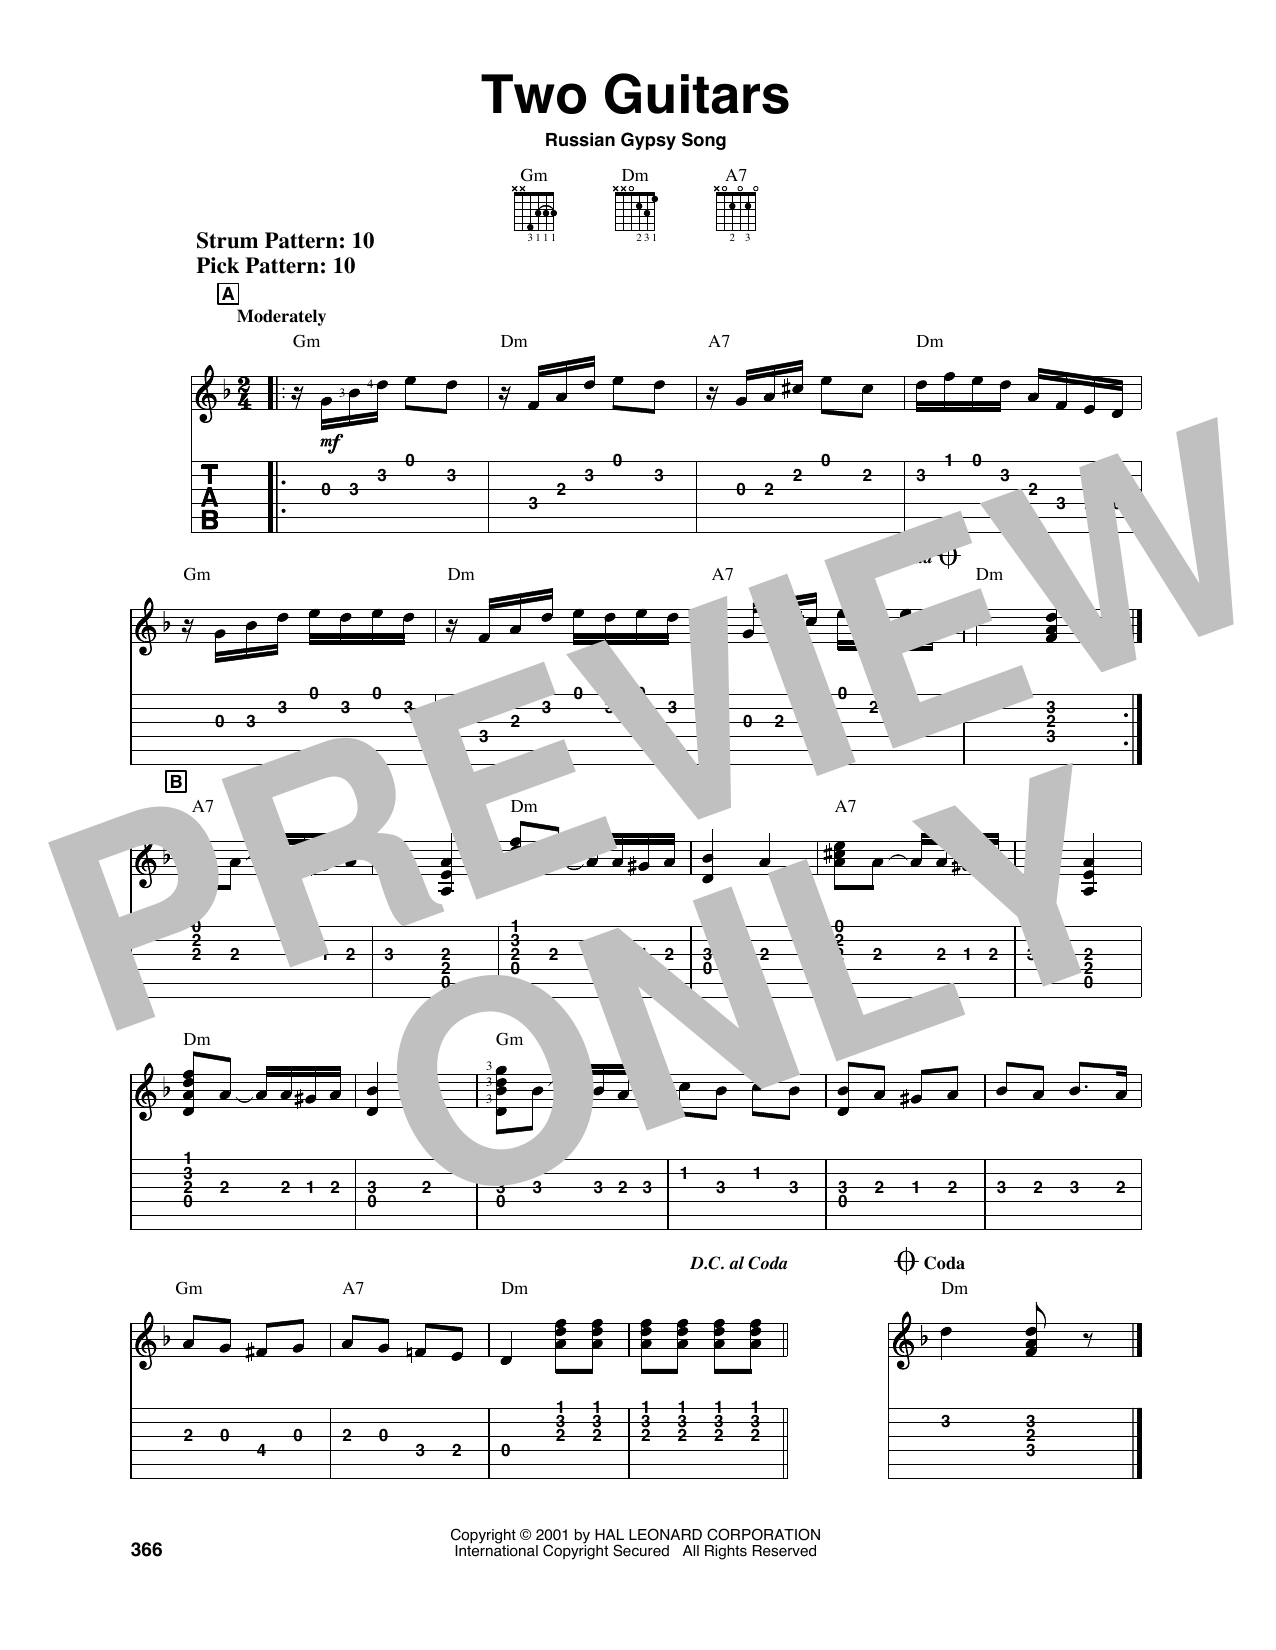 Download Russian Gypsy Song Two Guitars Sheet Music